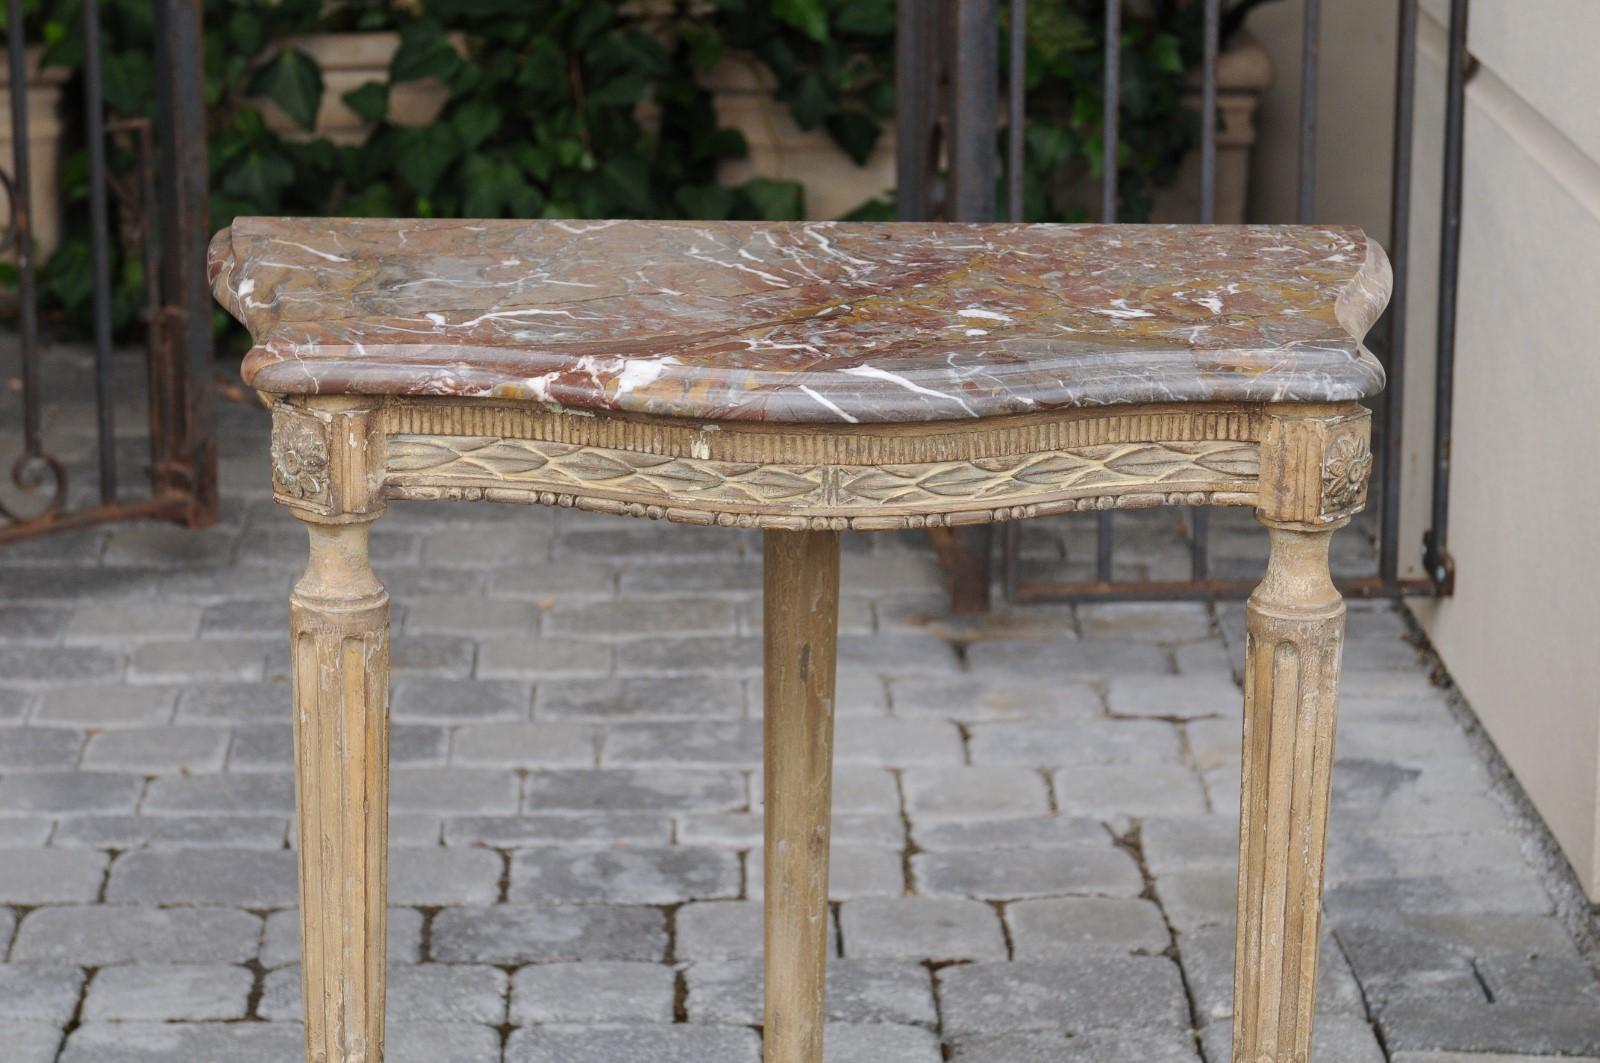 A pair of French neoclassical painted wood console tables with variegated marble tops. Born in France almost a century apart, this pair of neoclassical console tables charms our eyes with its elegant lines and distressed finish. While one was born